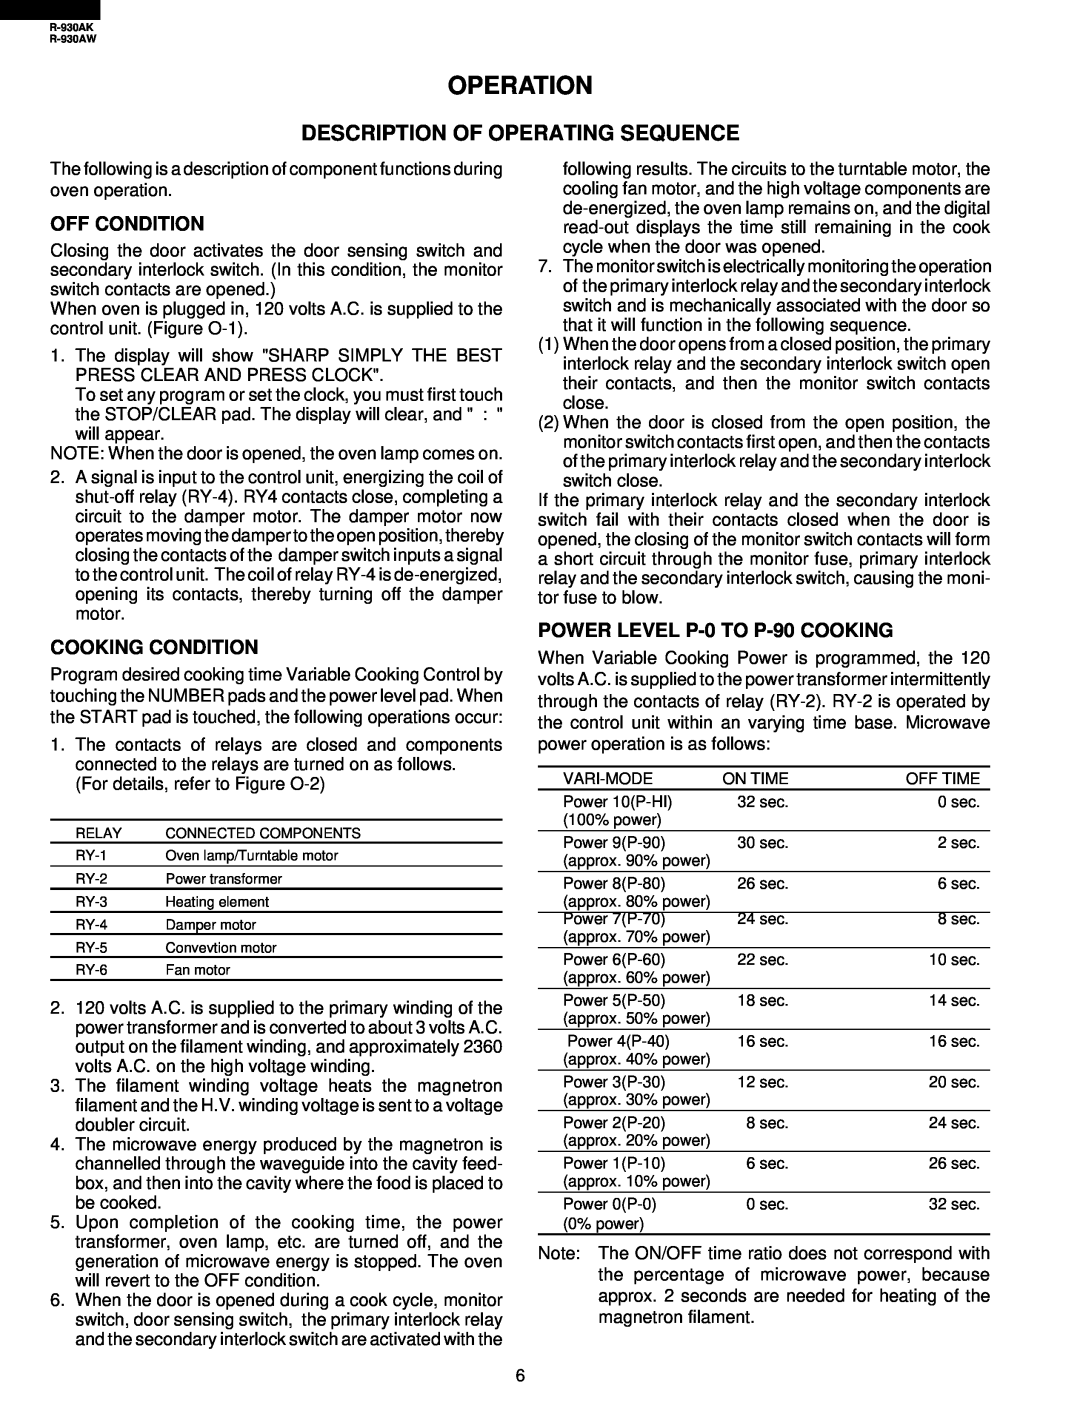 Sharp R-930AW service manual Operation, Description Of Operating Sequence, Off Condition, Cooking Condition 